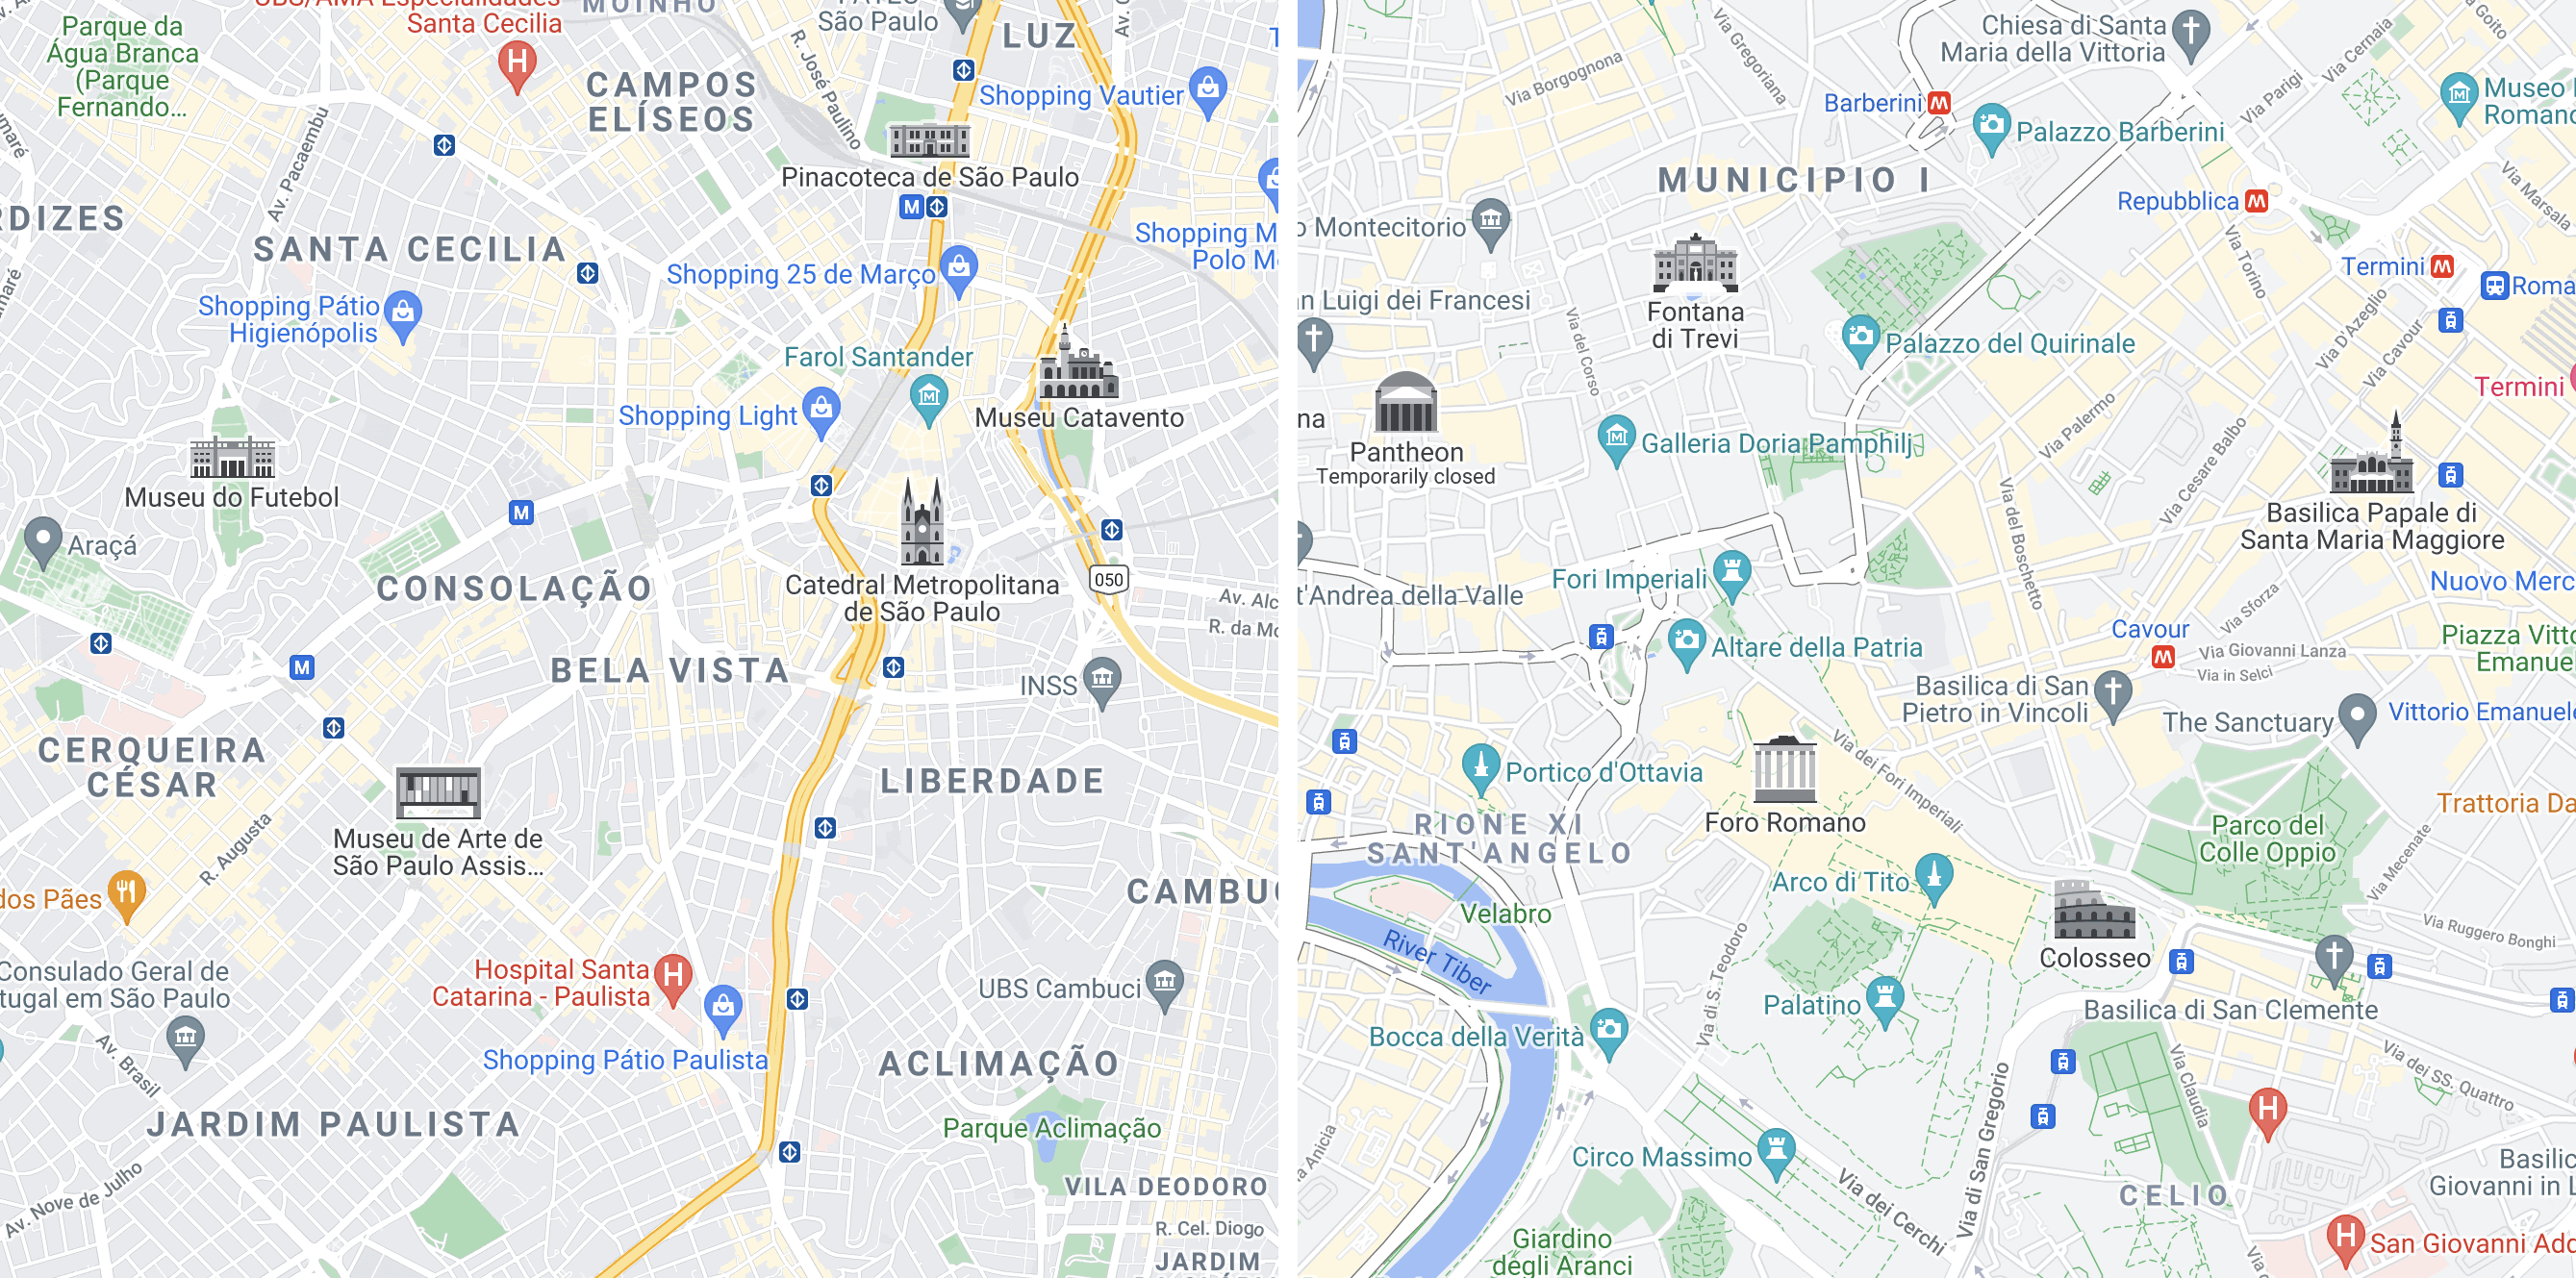 Landmarks in Sao Paulo (left) and Rome (right)